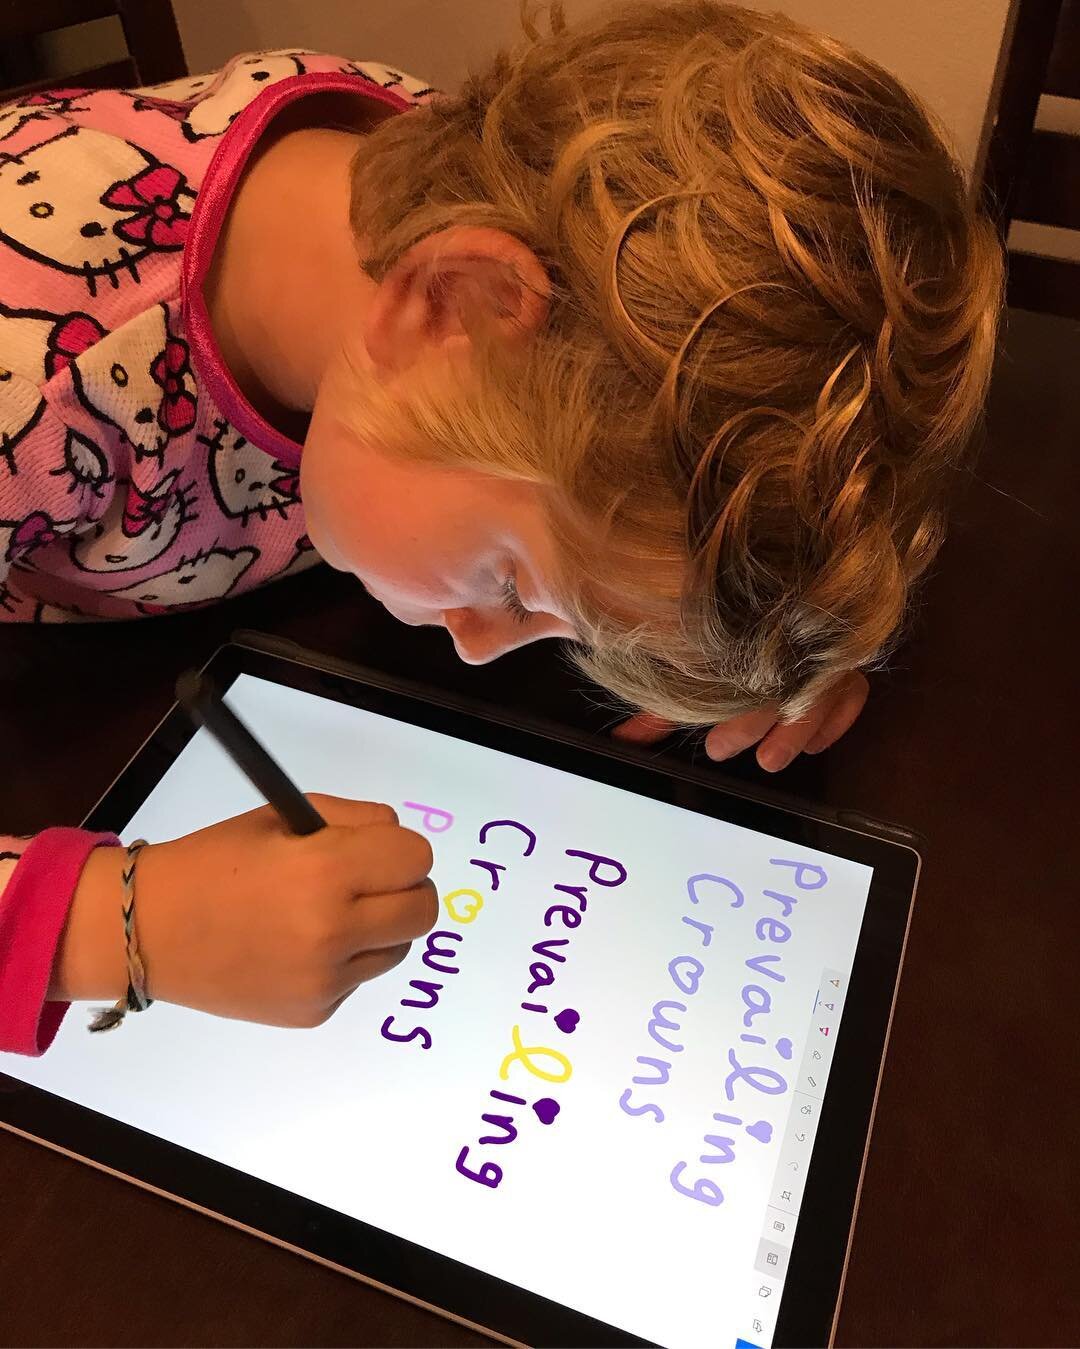 She&rsquo;s working so hard on making a logo for Prevailing Crowns.  I love how she came up with coloring the &ldquo;L&rdquo; gold all on her own!  She was having so much fun she came up with some inspirational messages.  What color do you like best?